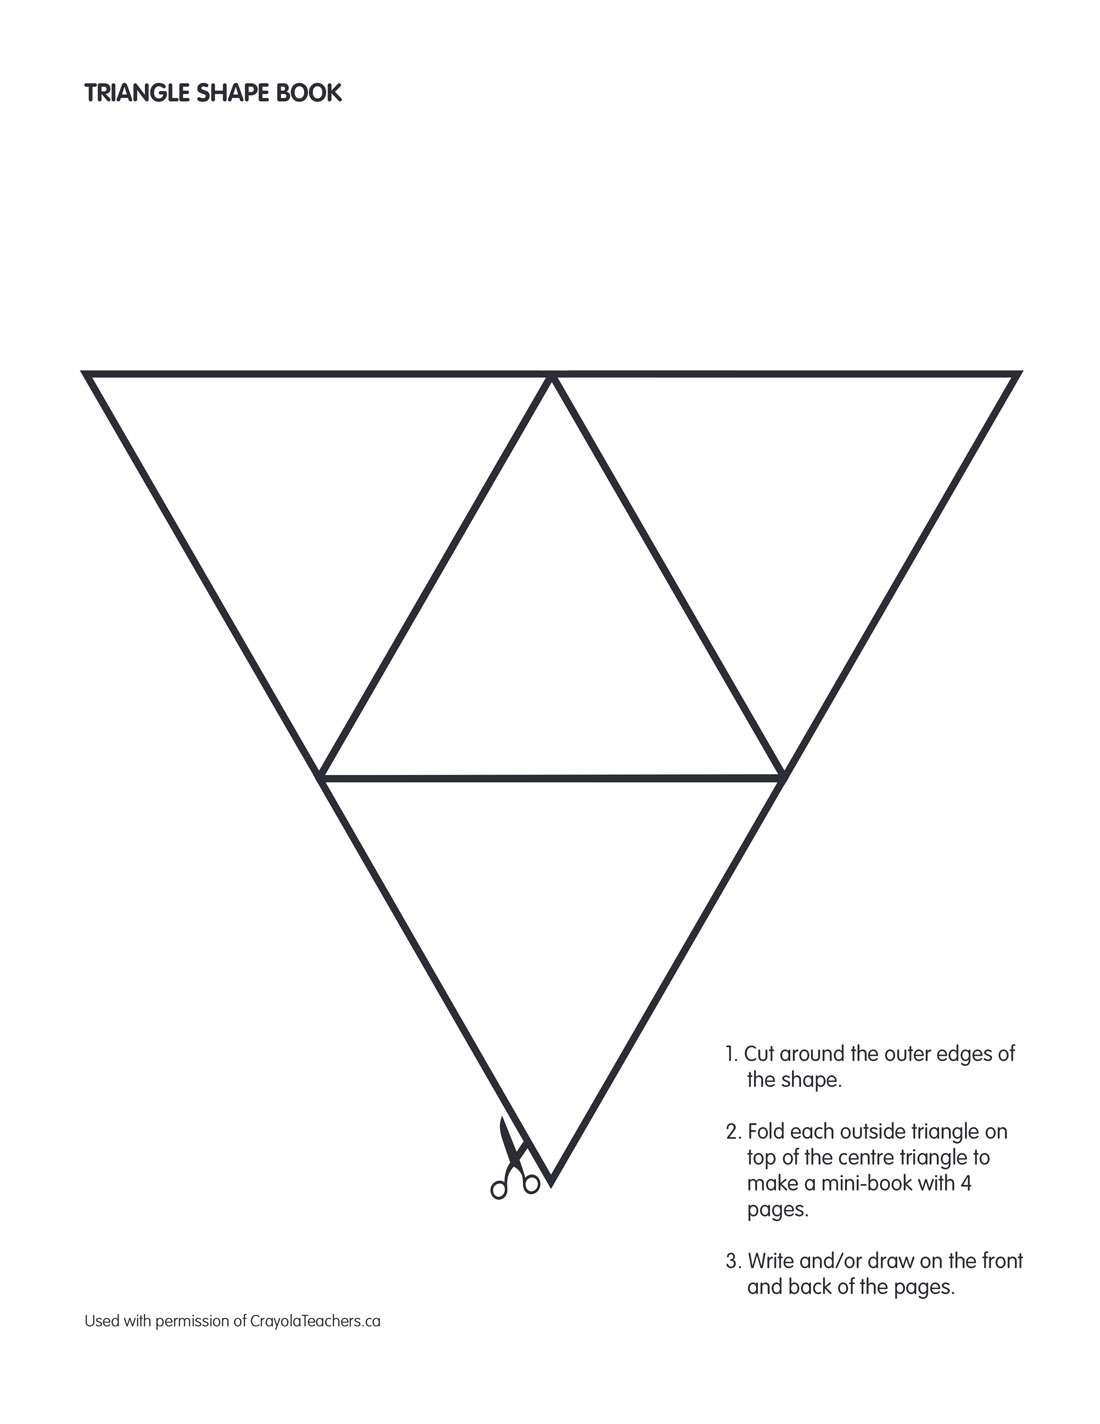 How to Draw a Hexagon